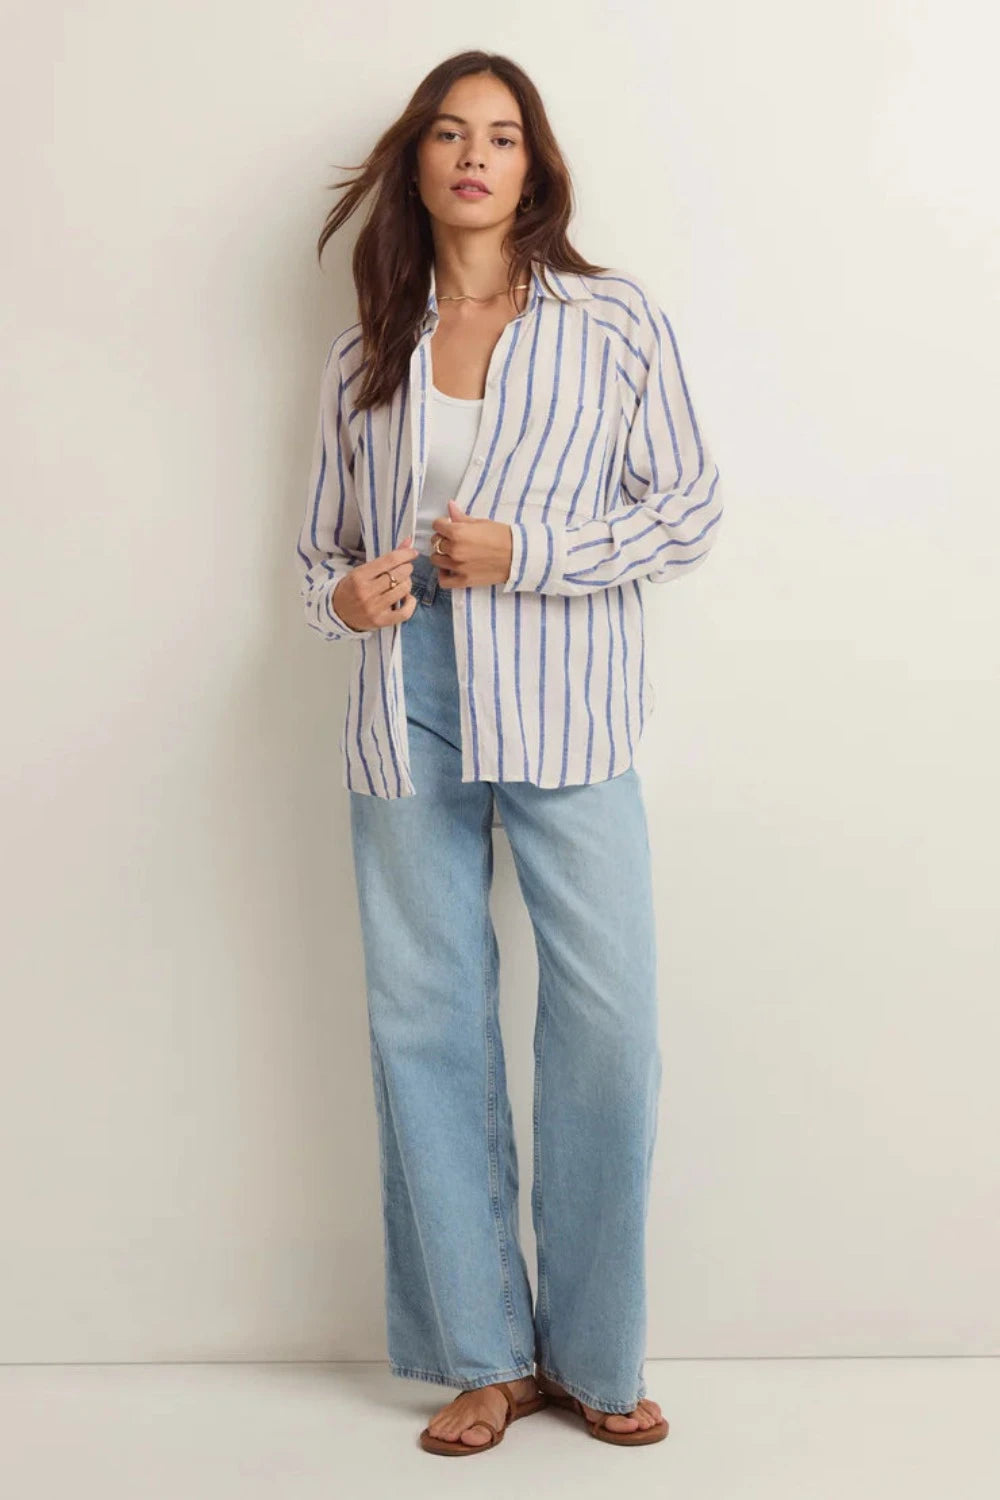 Perfect Linen Stripe Top in Palace Blue